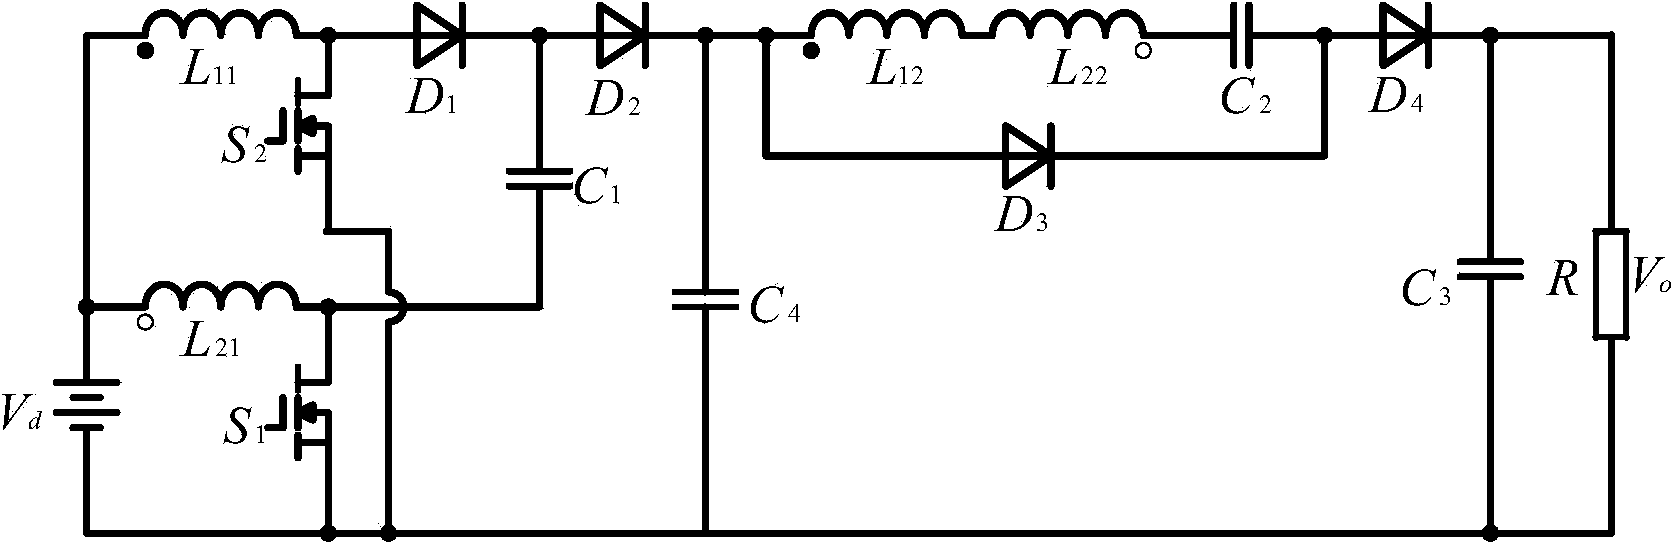 High-gain boost converter based on coupling inductance and voltage transfer technology